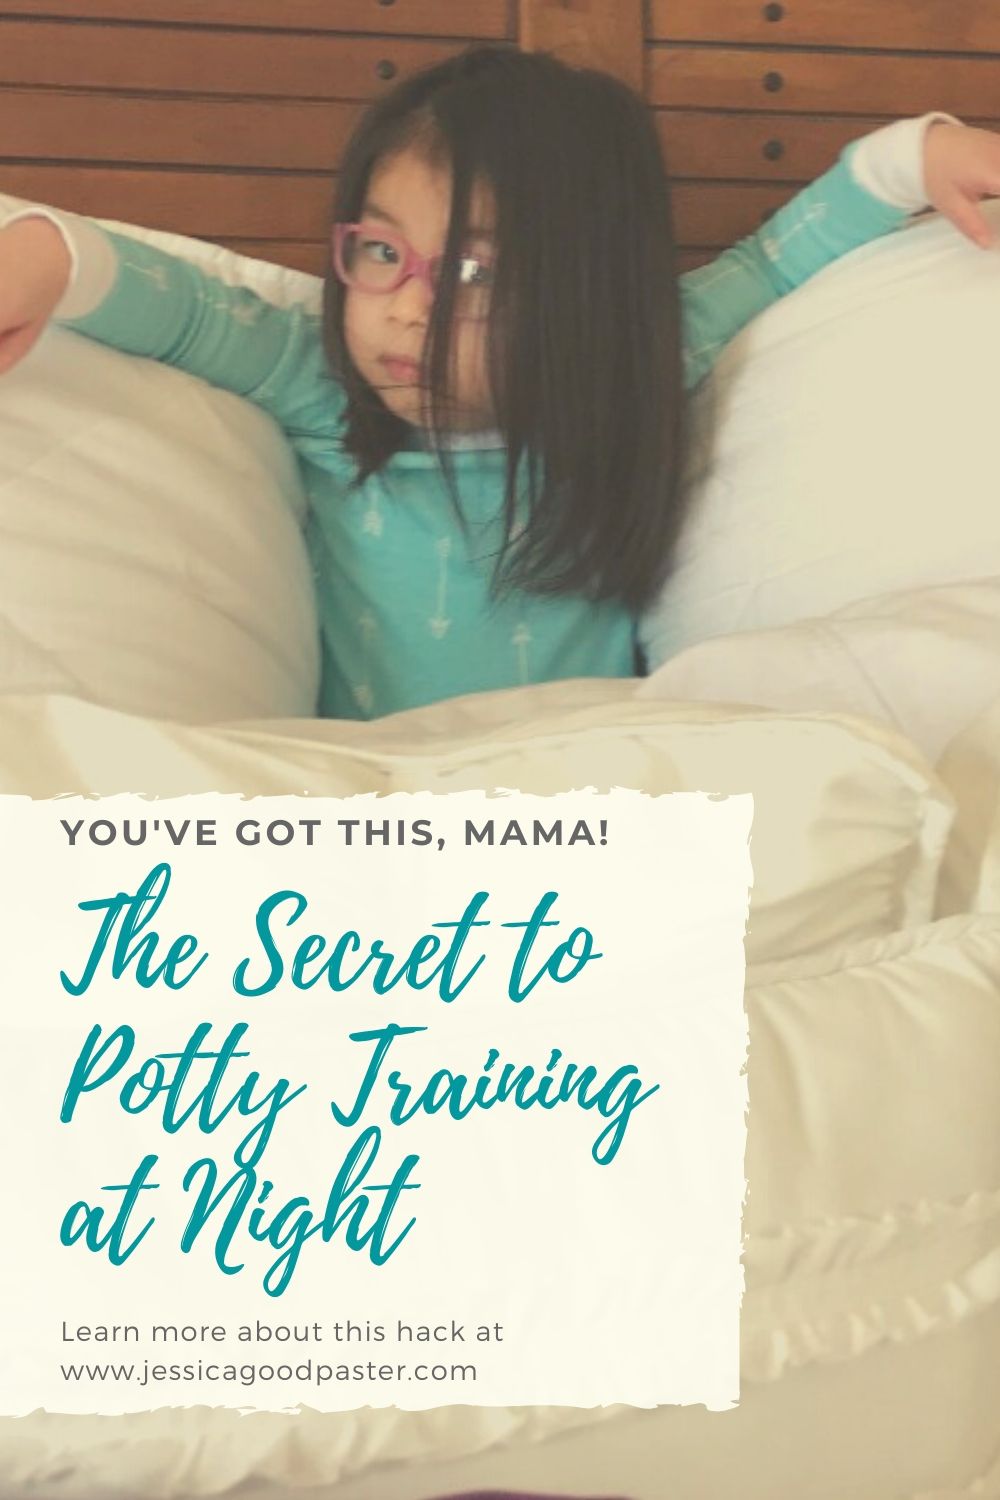 The Best Potty Training Hack for Night - A Peejamas Review | This tip will help kid get over the hump of potty training at night. These essentials are great for boys and girls. Avoid expensive disposable overnight pull-ups with this pajama hack. #pottytraining  #pottytrainingtips #bedwetting #kidspajamas 